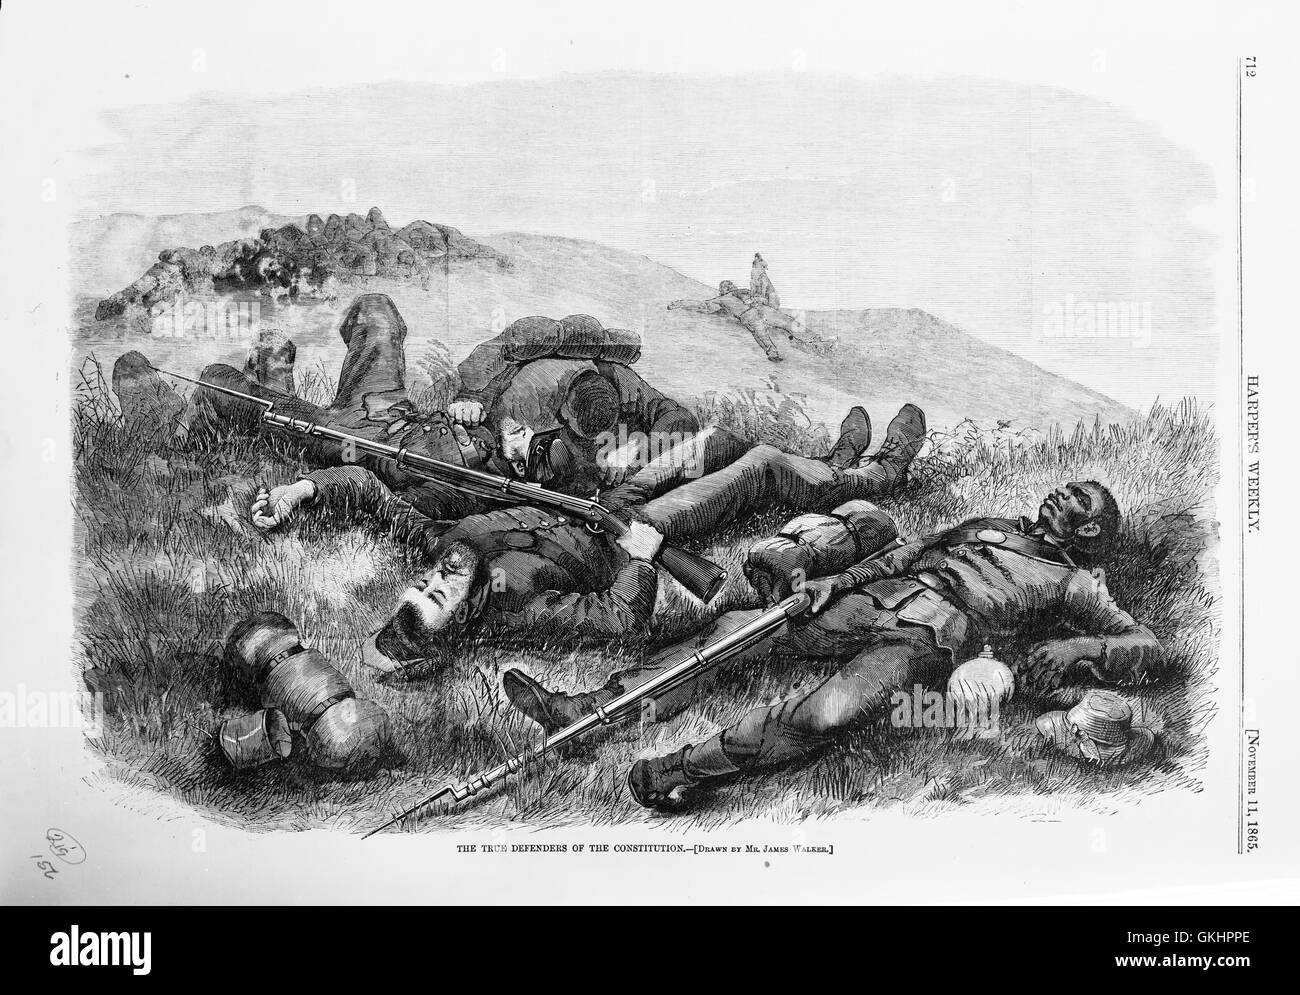 The True Defenders of the Constitution - Harper's Weekly illustration showing dead Union Civil War soldiers, including an African-American. Illustration by James Walker. Stock Photo